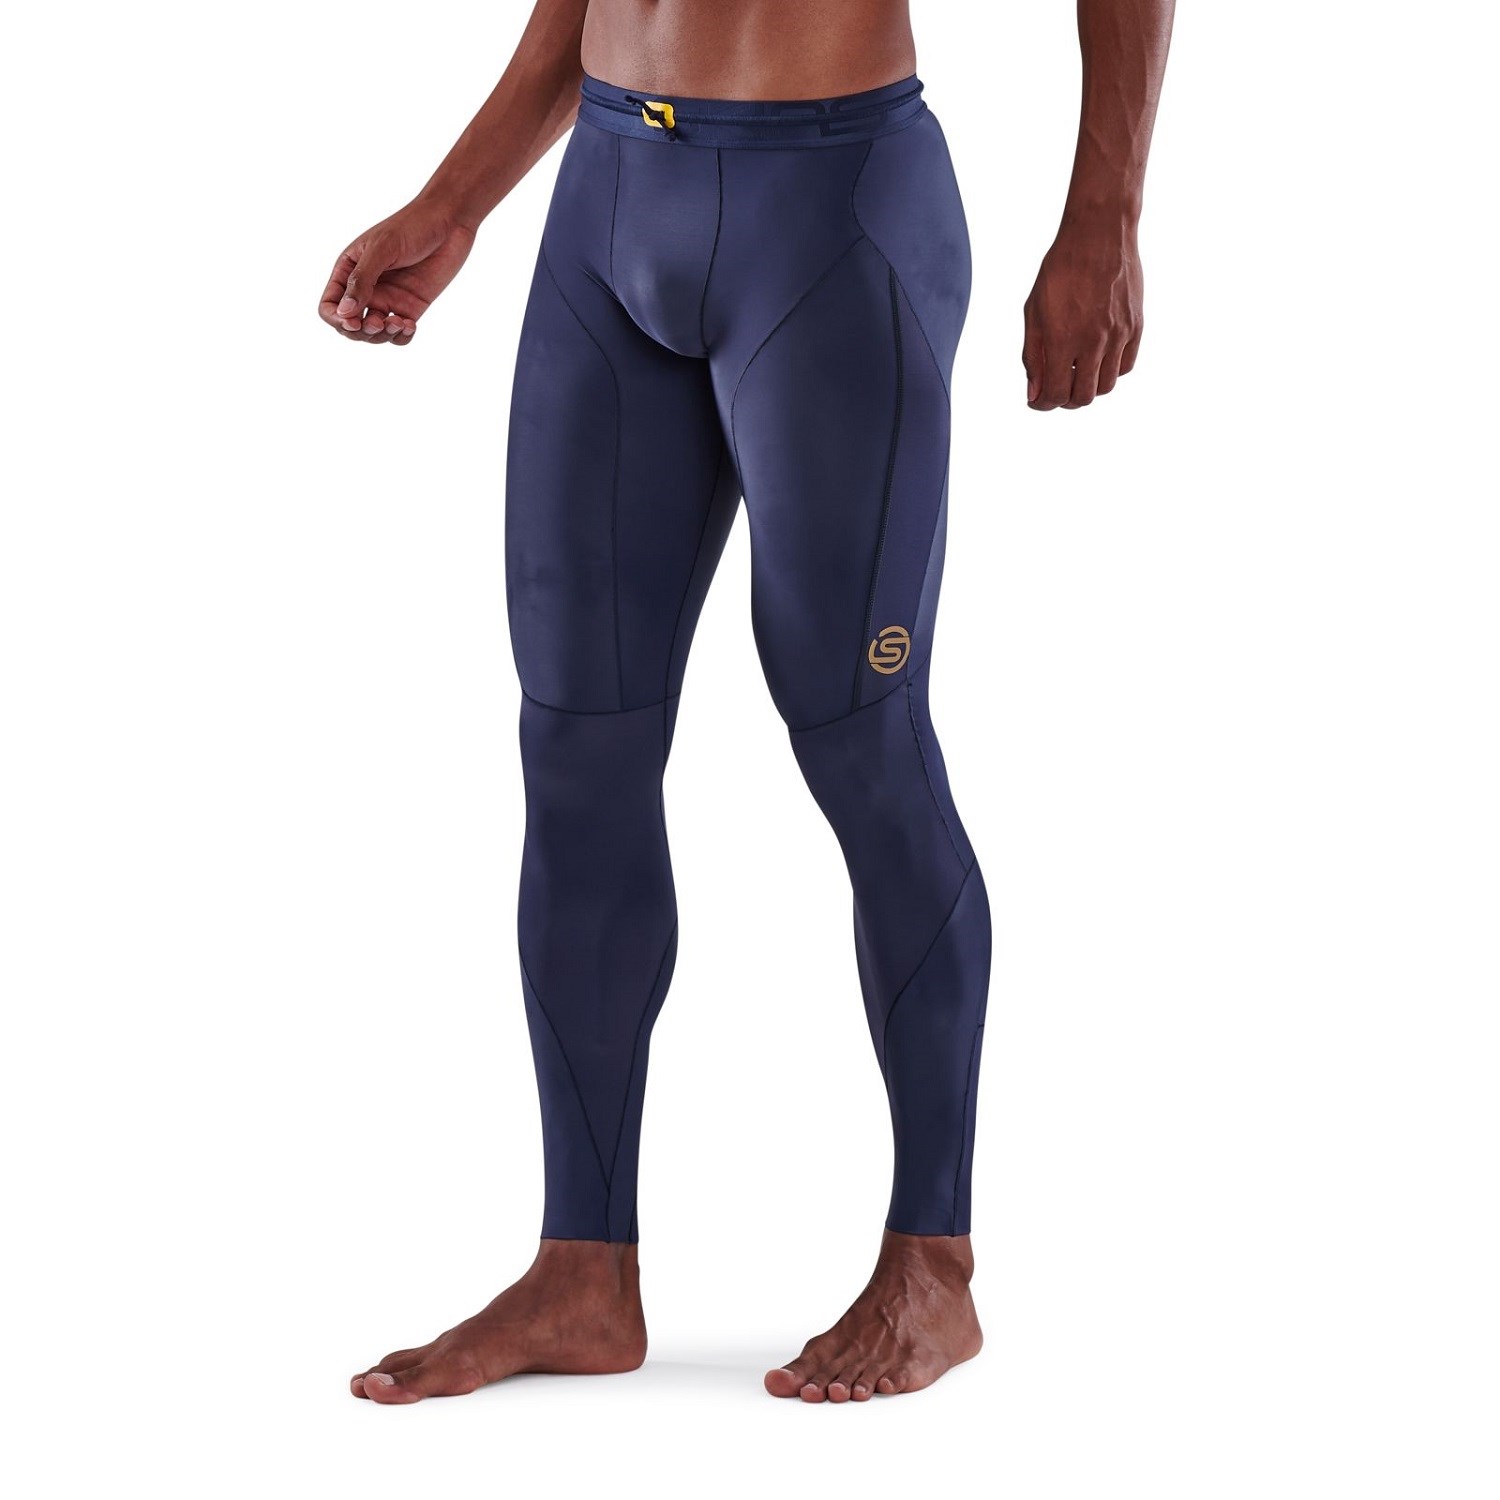 Skins Series-5 Mens Compression Long Tights - Navy Blue | Sportitude